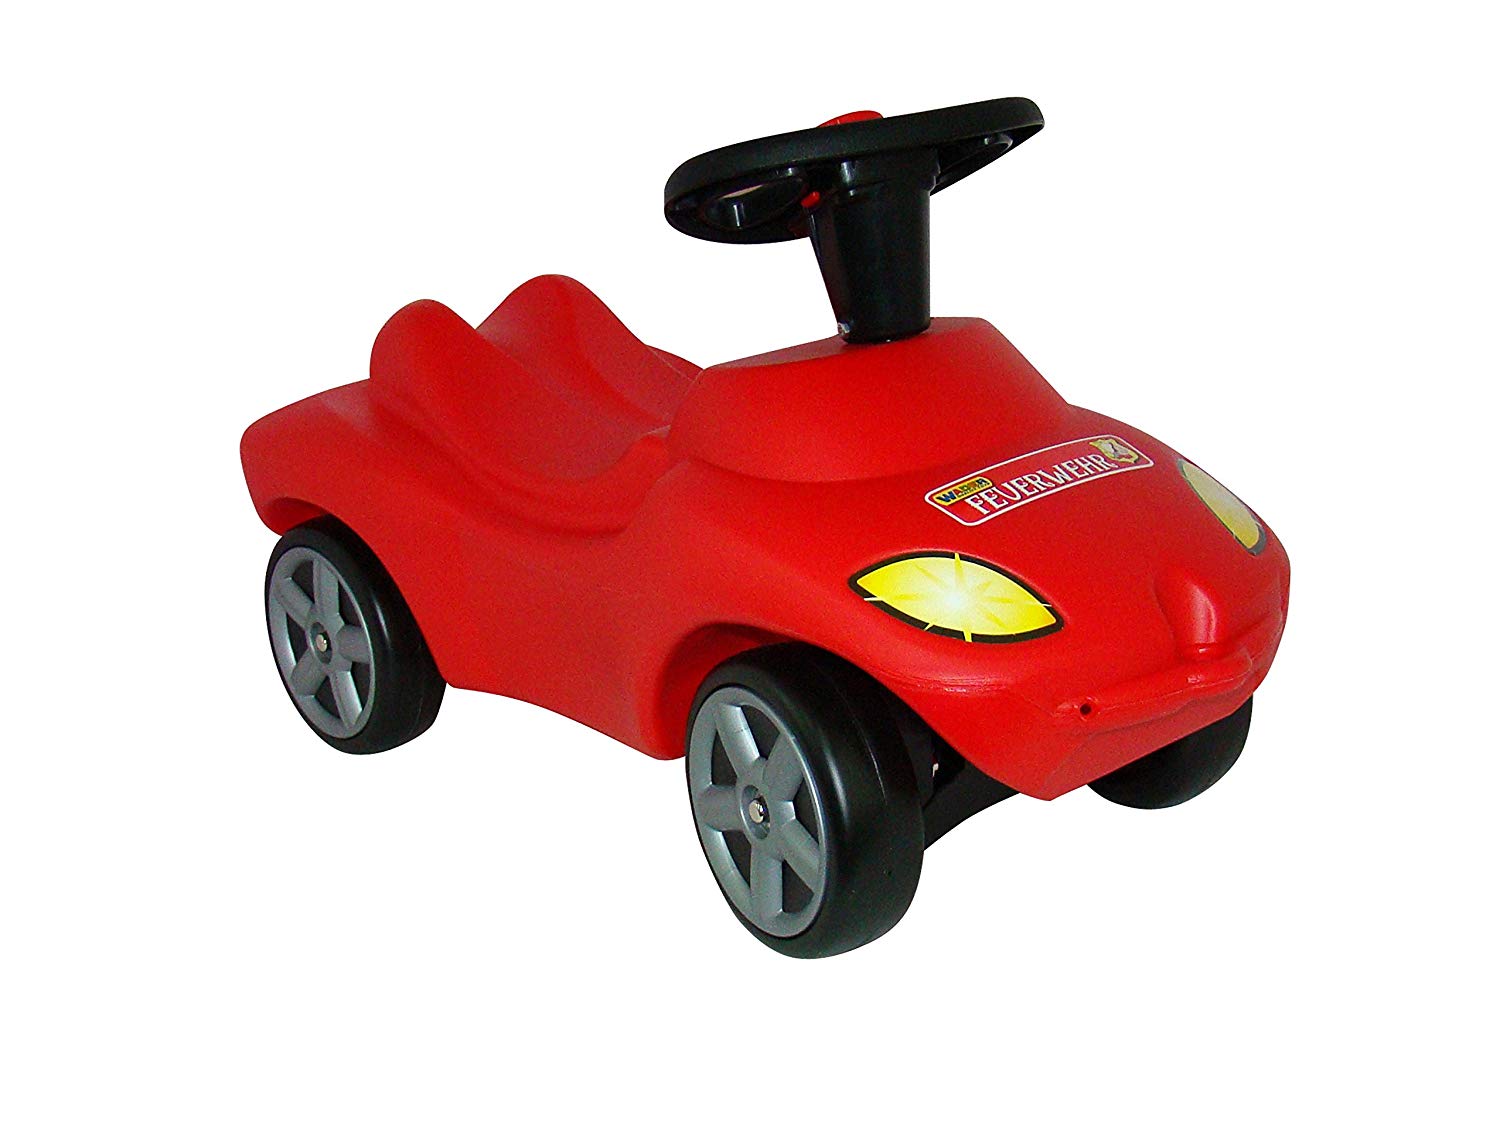 Wadder Racer Ride On Red